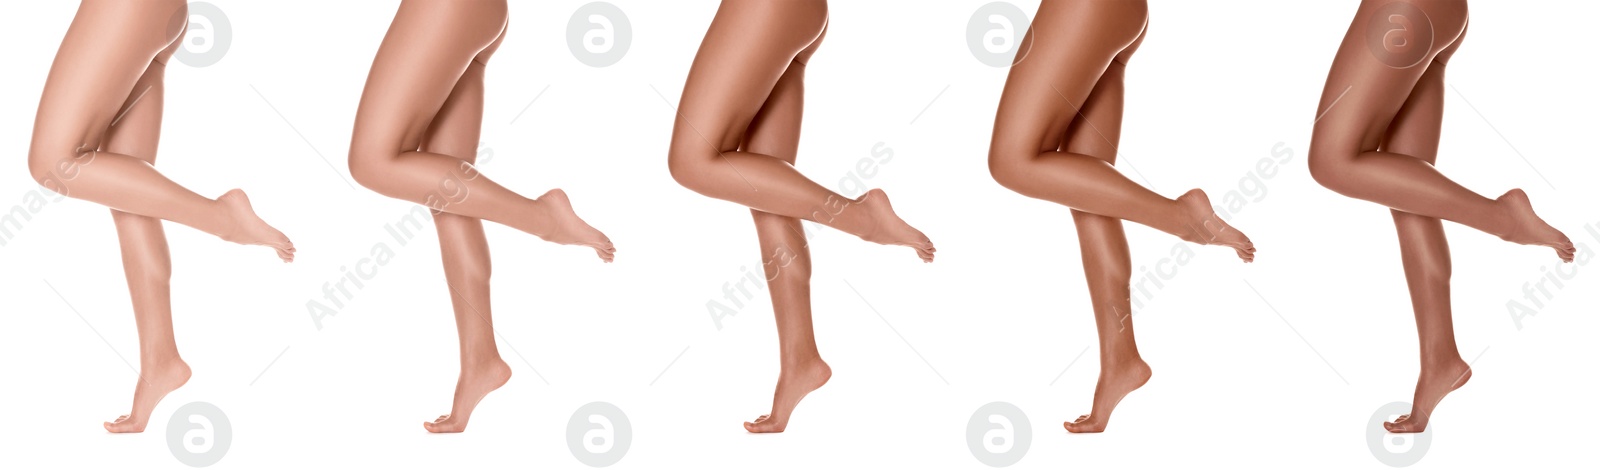 Image of Woman with beautiful legs on white background, closeup. Collage of photos showing stages of suntanning